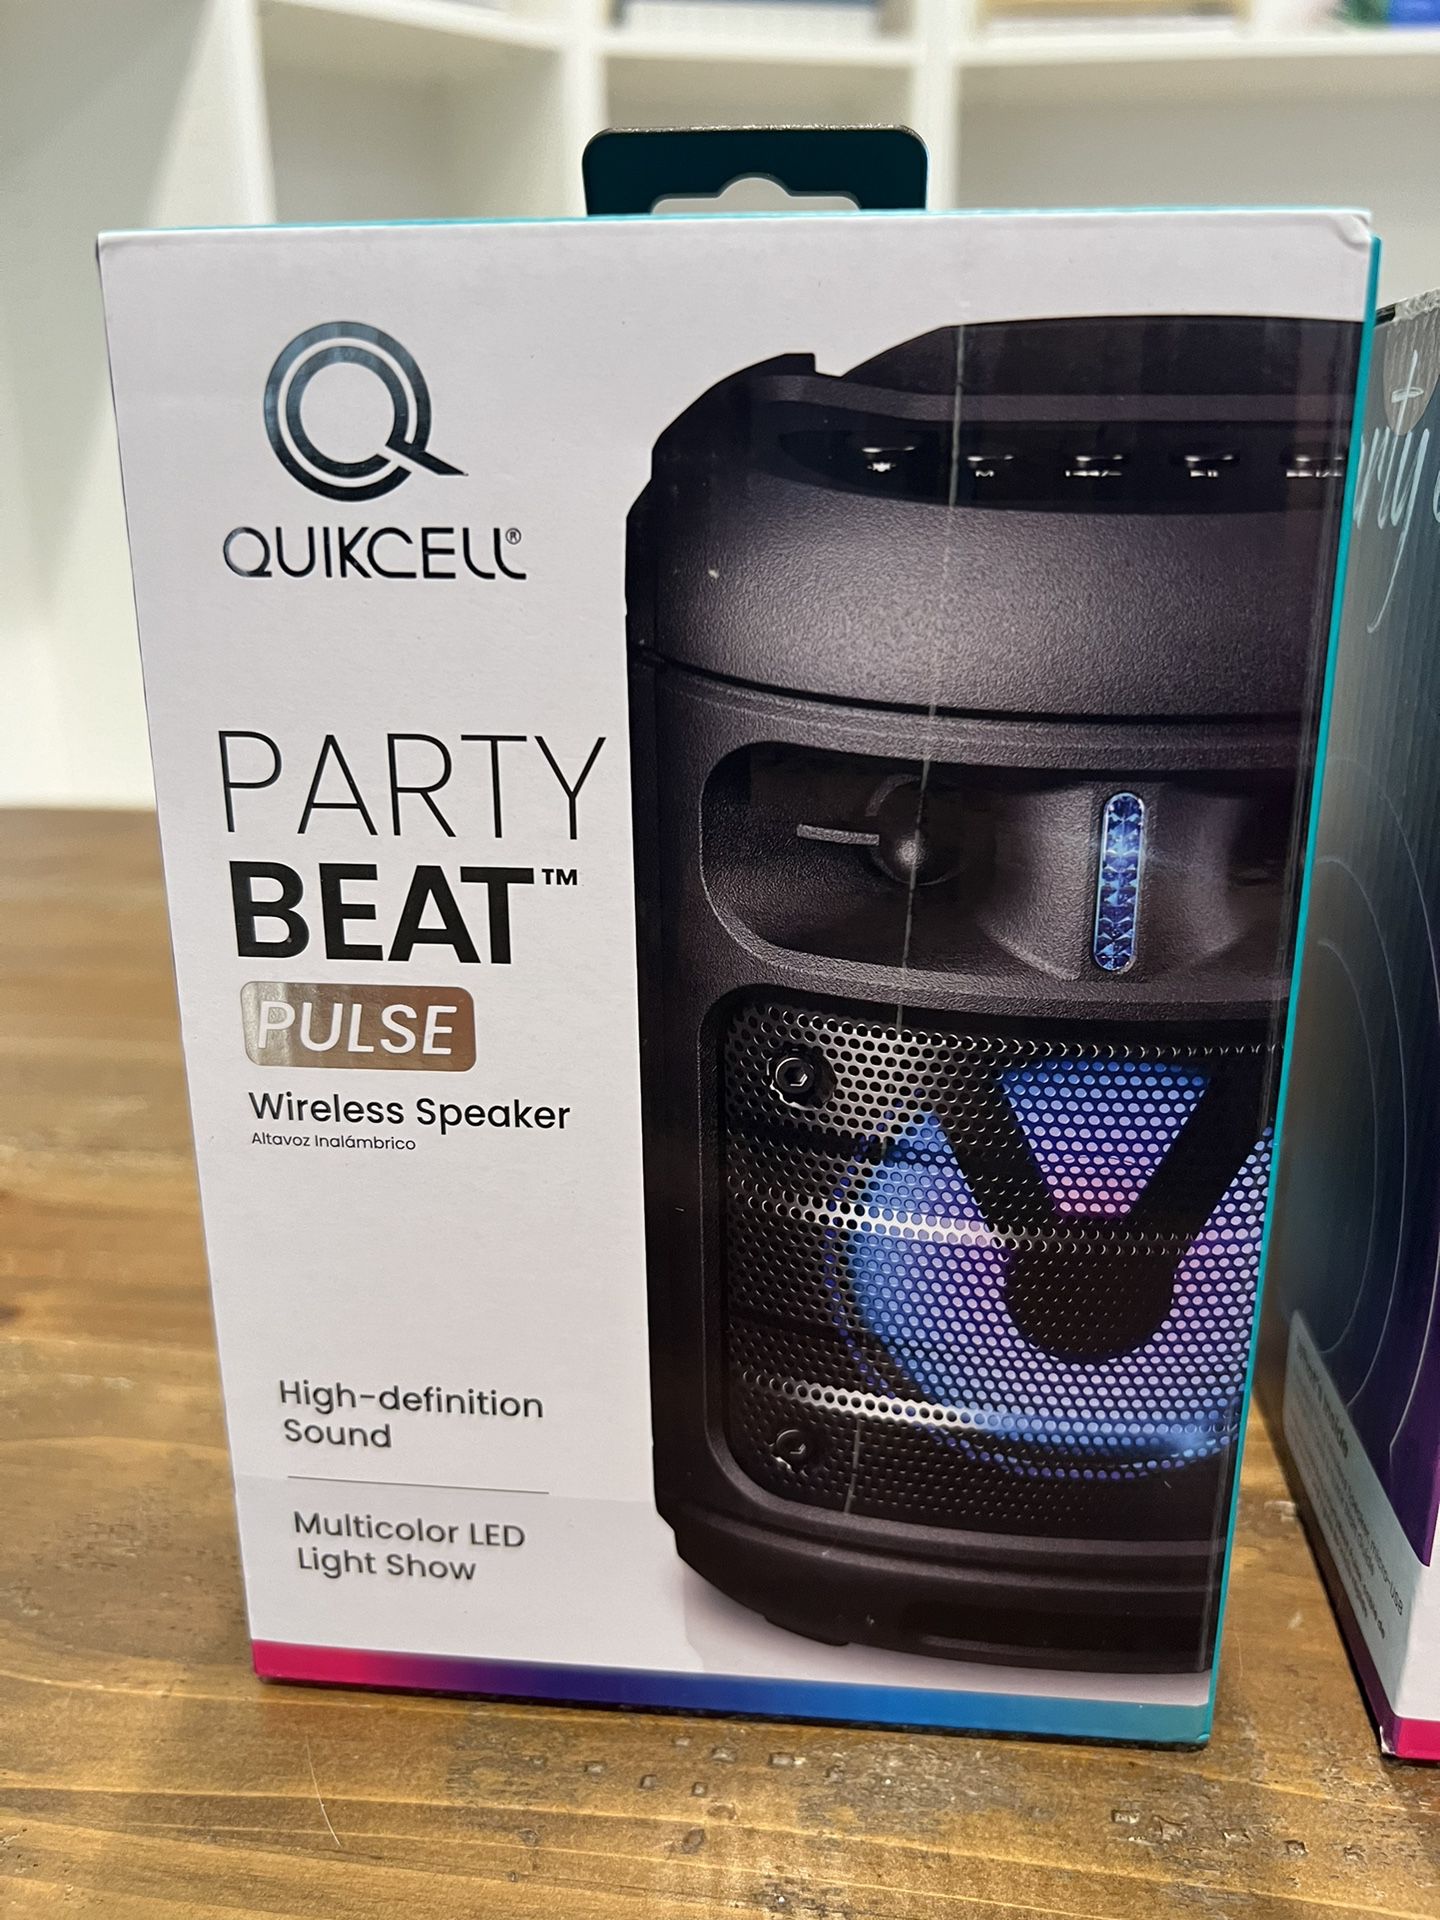 Quikcell Party Beat Pulse Wireless Speaker